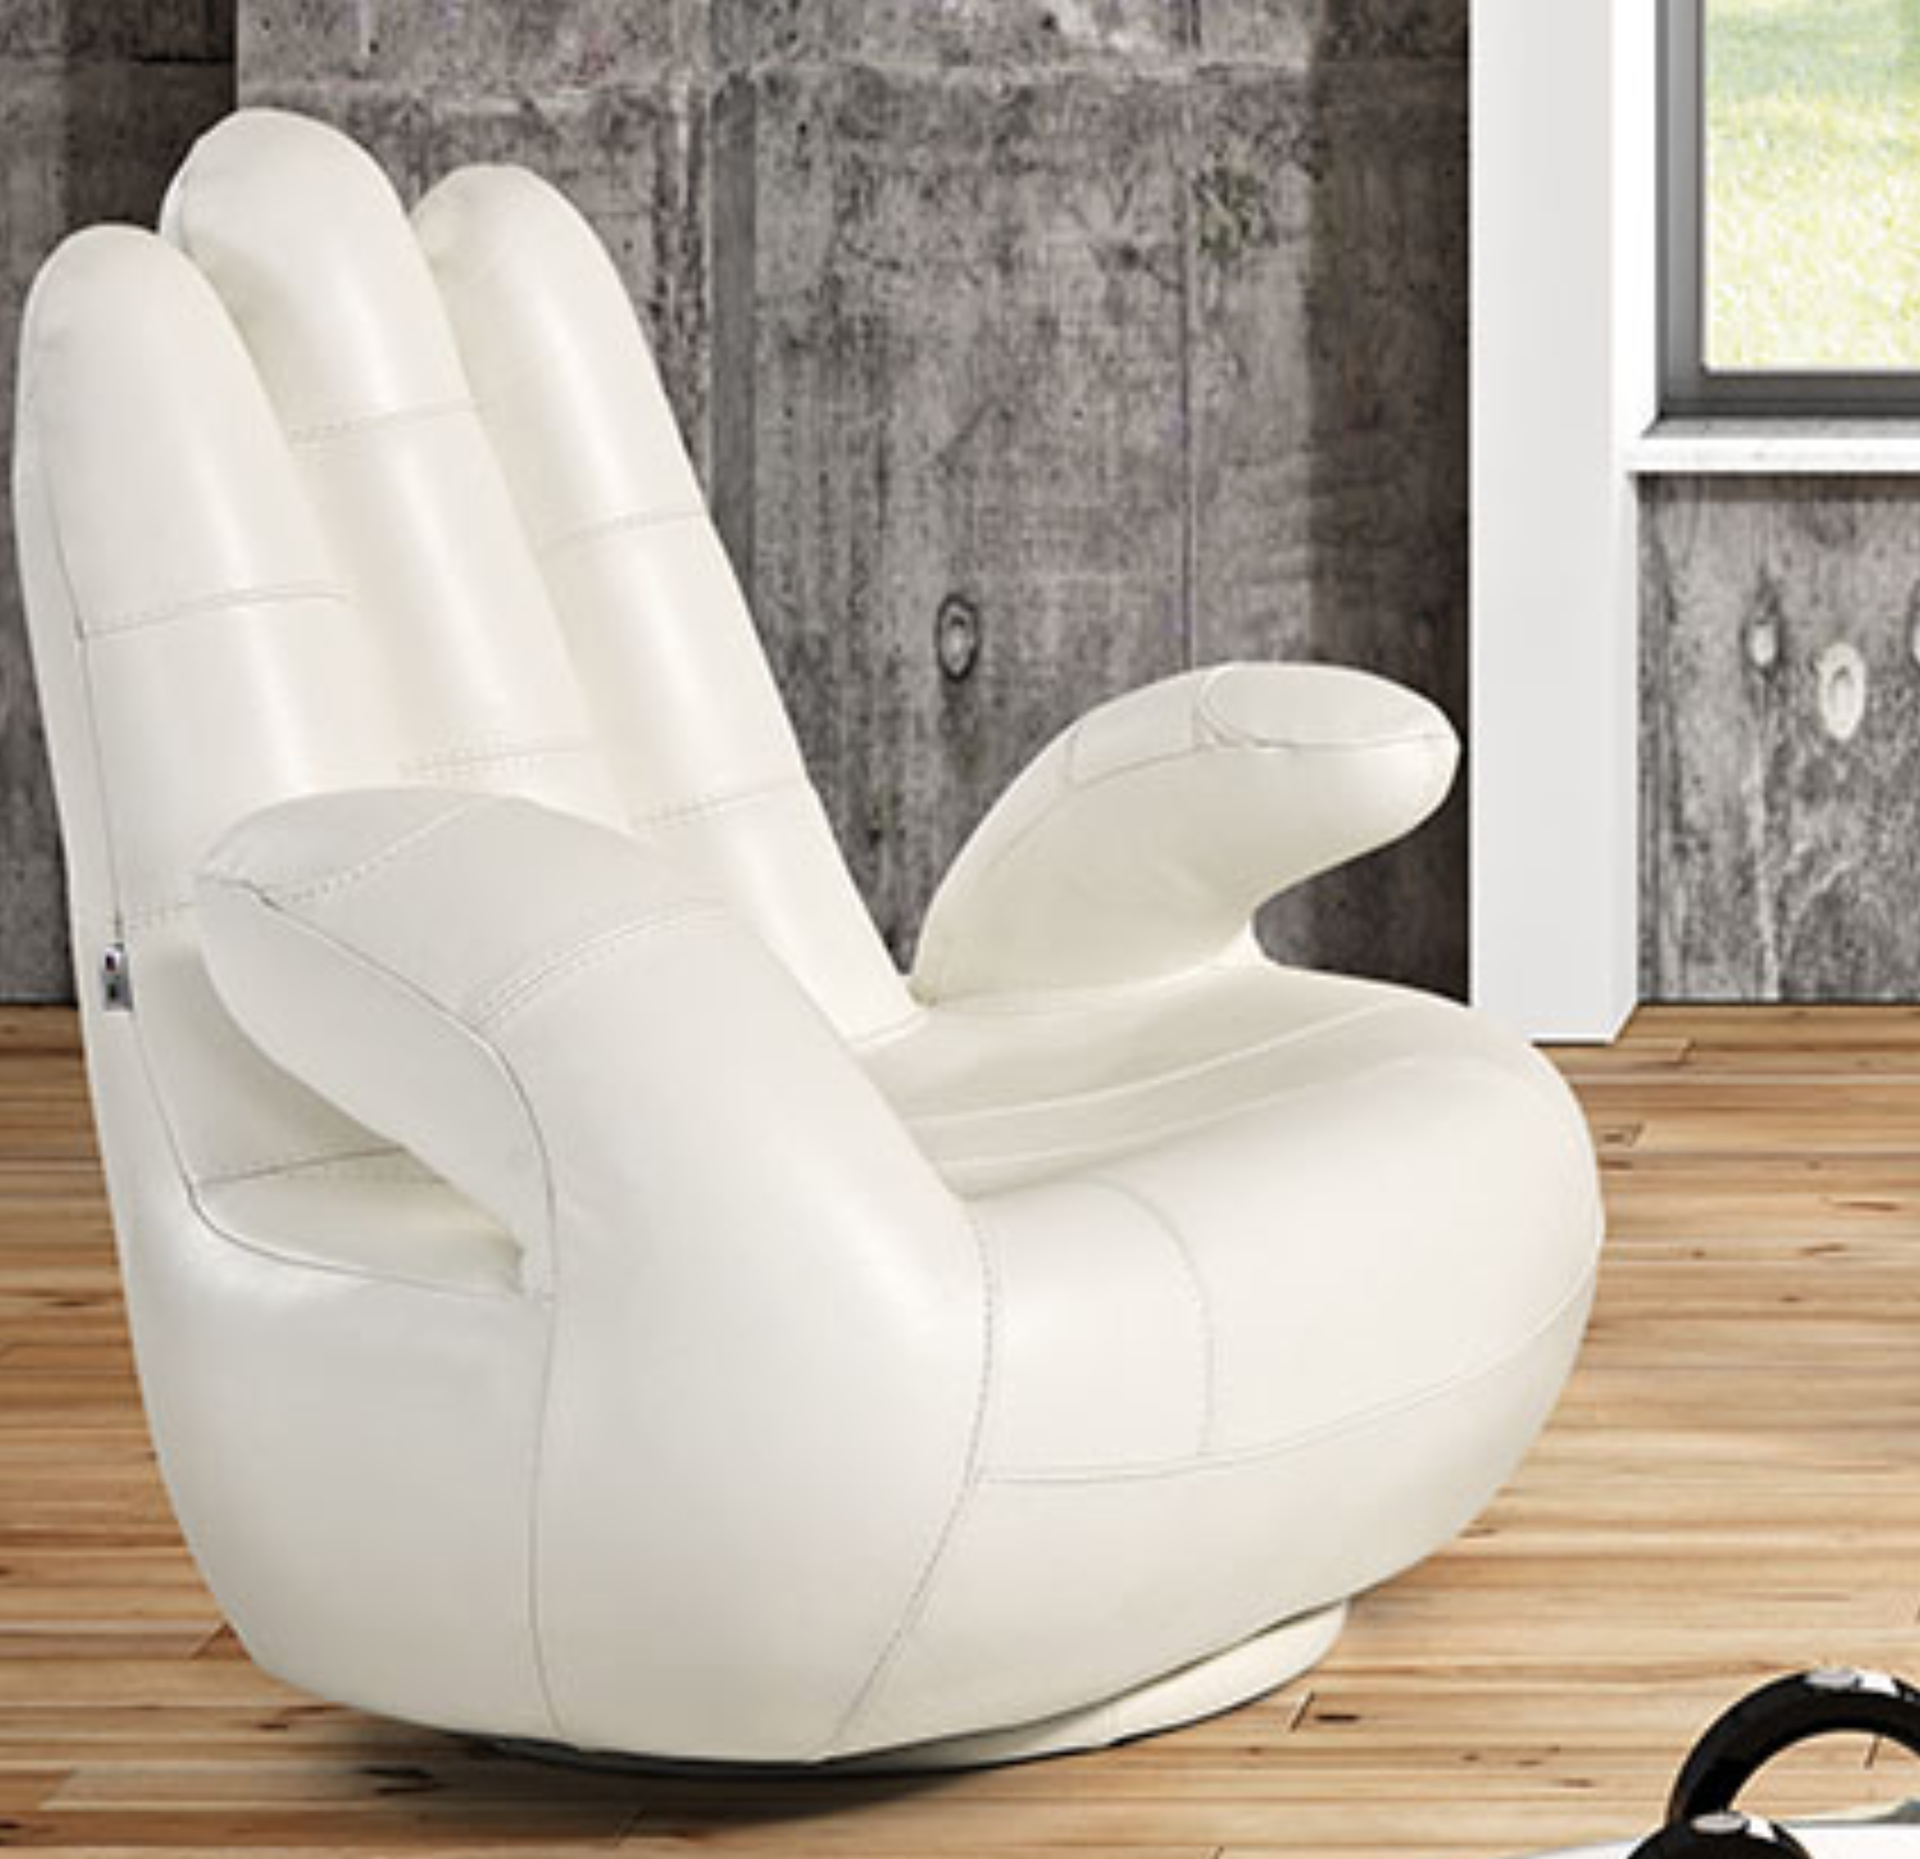 SOSIA ‘The Hand’ Italian Leather Chair in White Leather RRP £1699